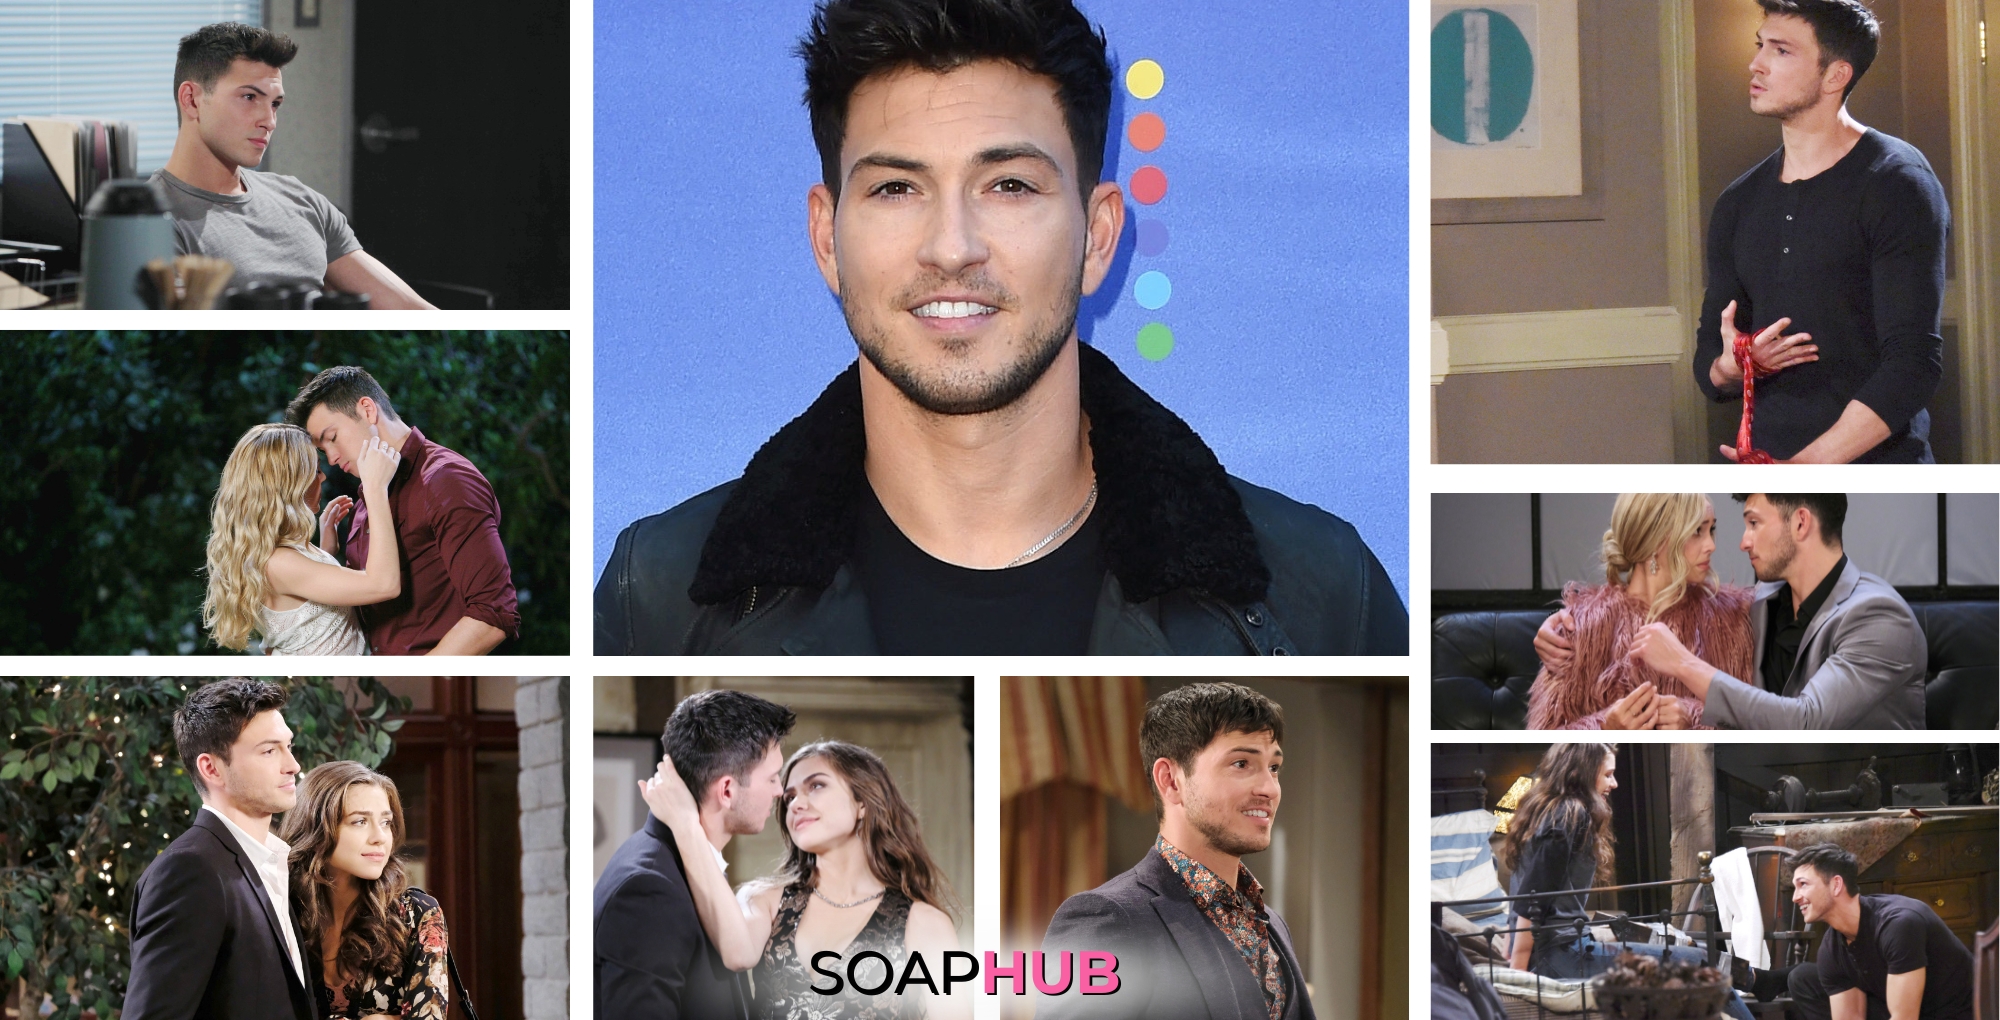 Robert Scott Wilson montage of 10 years on DAYS with the Soap Hub logo across the bottom.